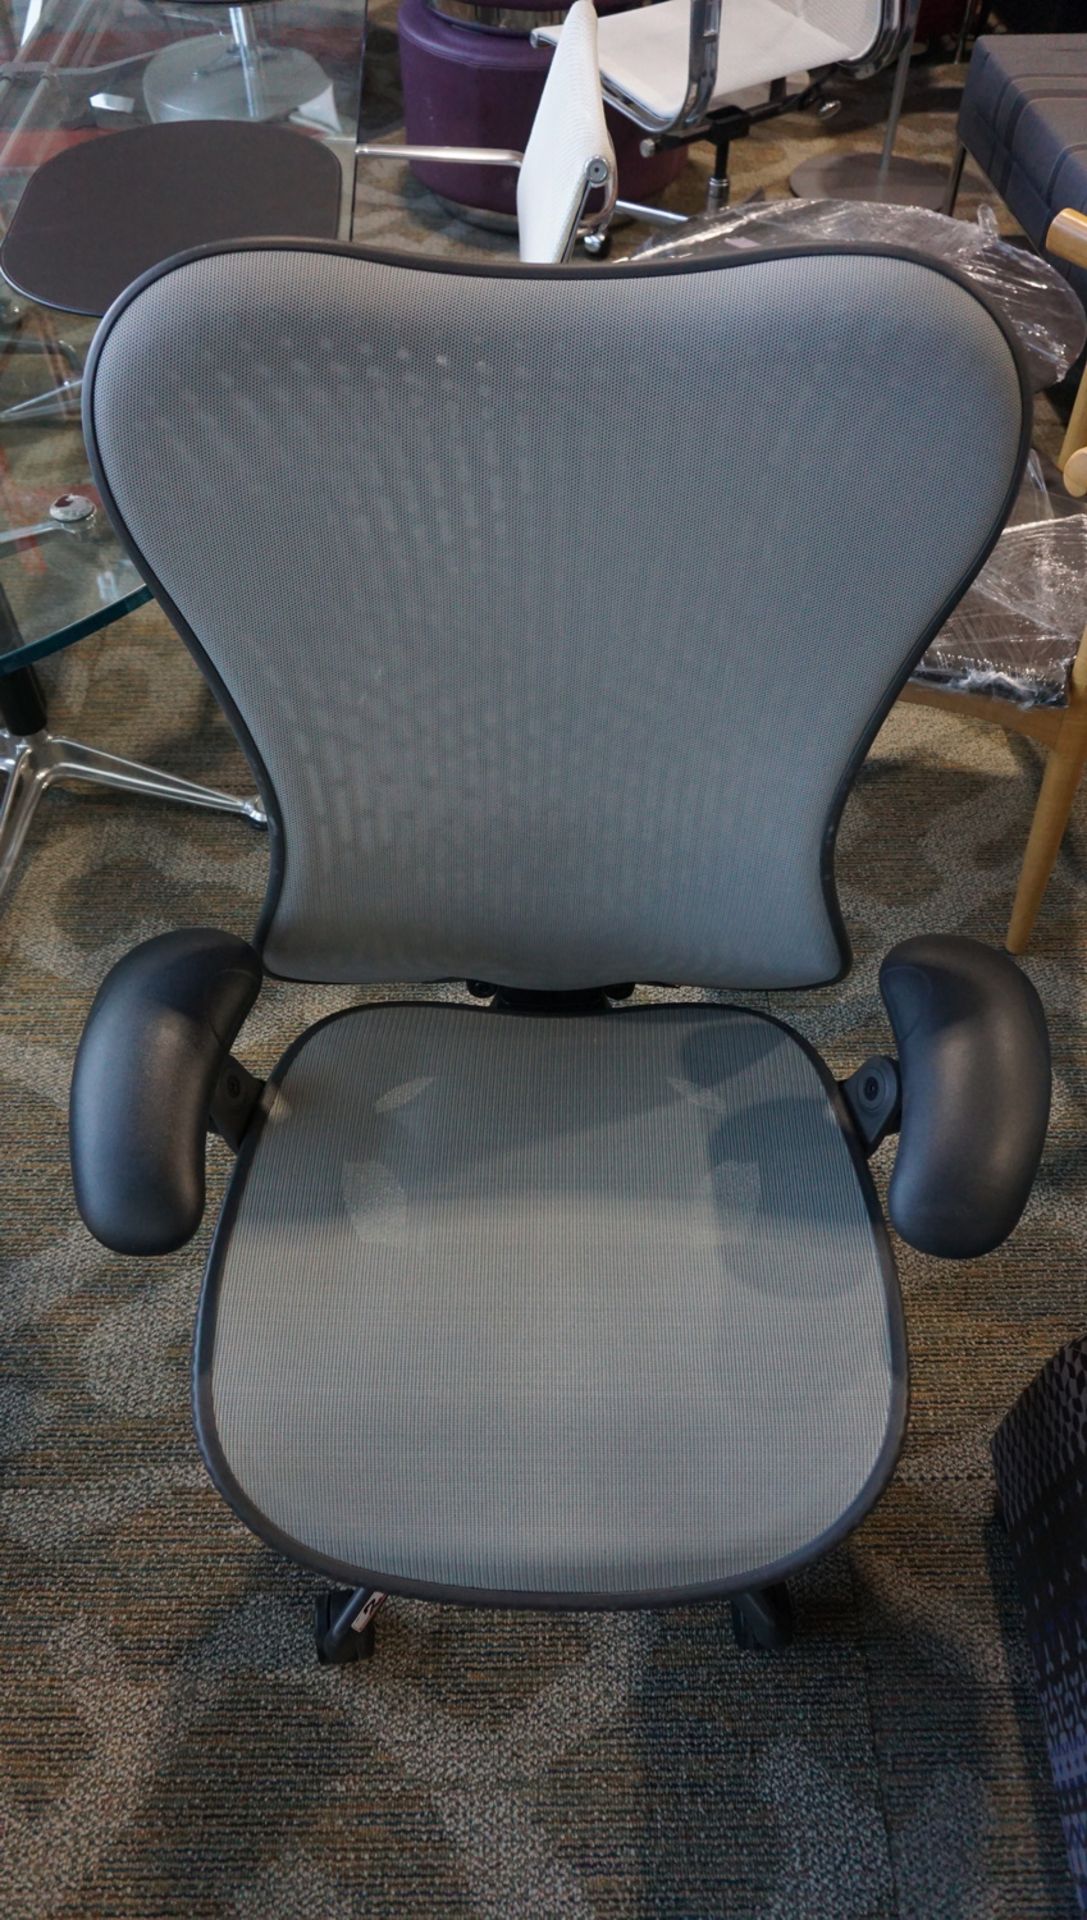 HERMAN MILLER MIRRA 1 OFFICE CHAIR W/ LUMBAR SUPPORT, BACK LOCK, ARM / SEAT ADJUSTMENTS - Image 5 of 5